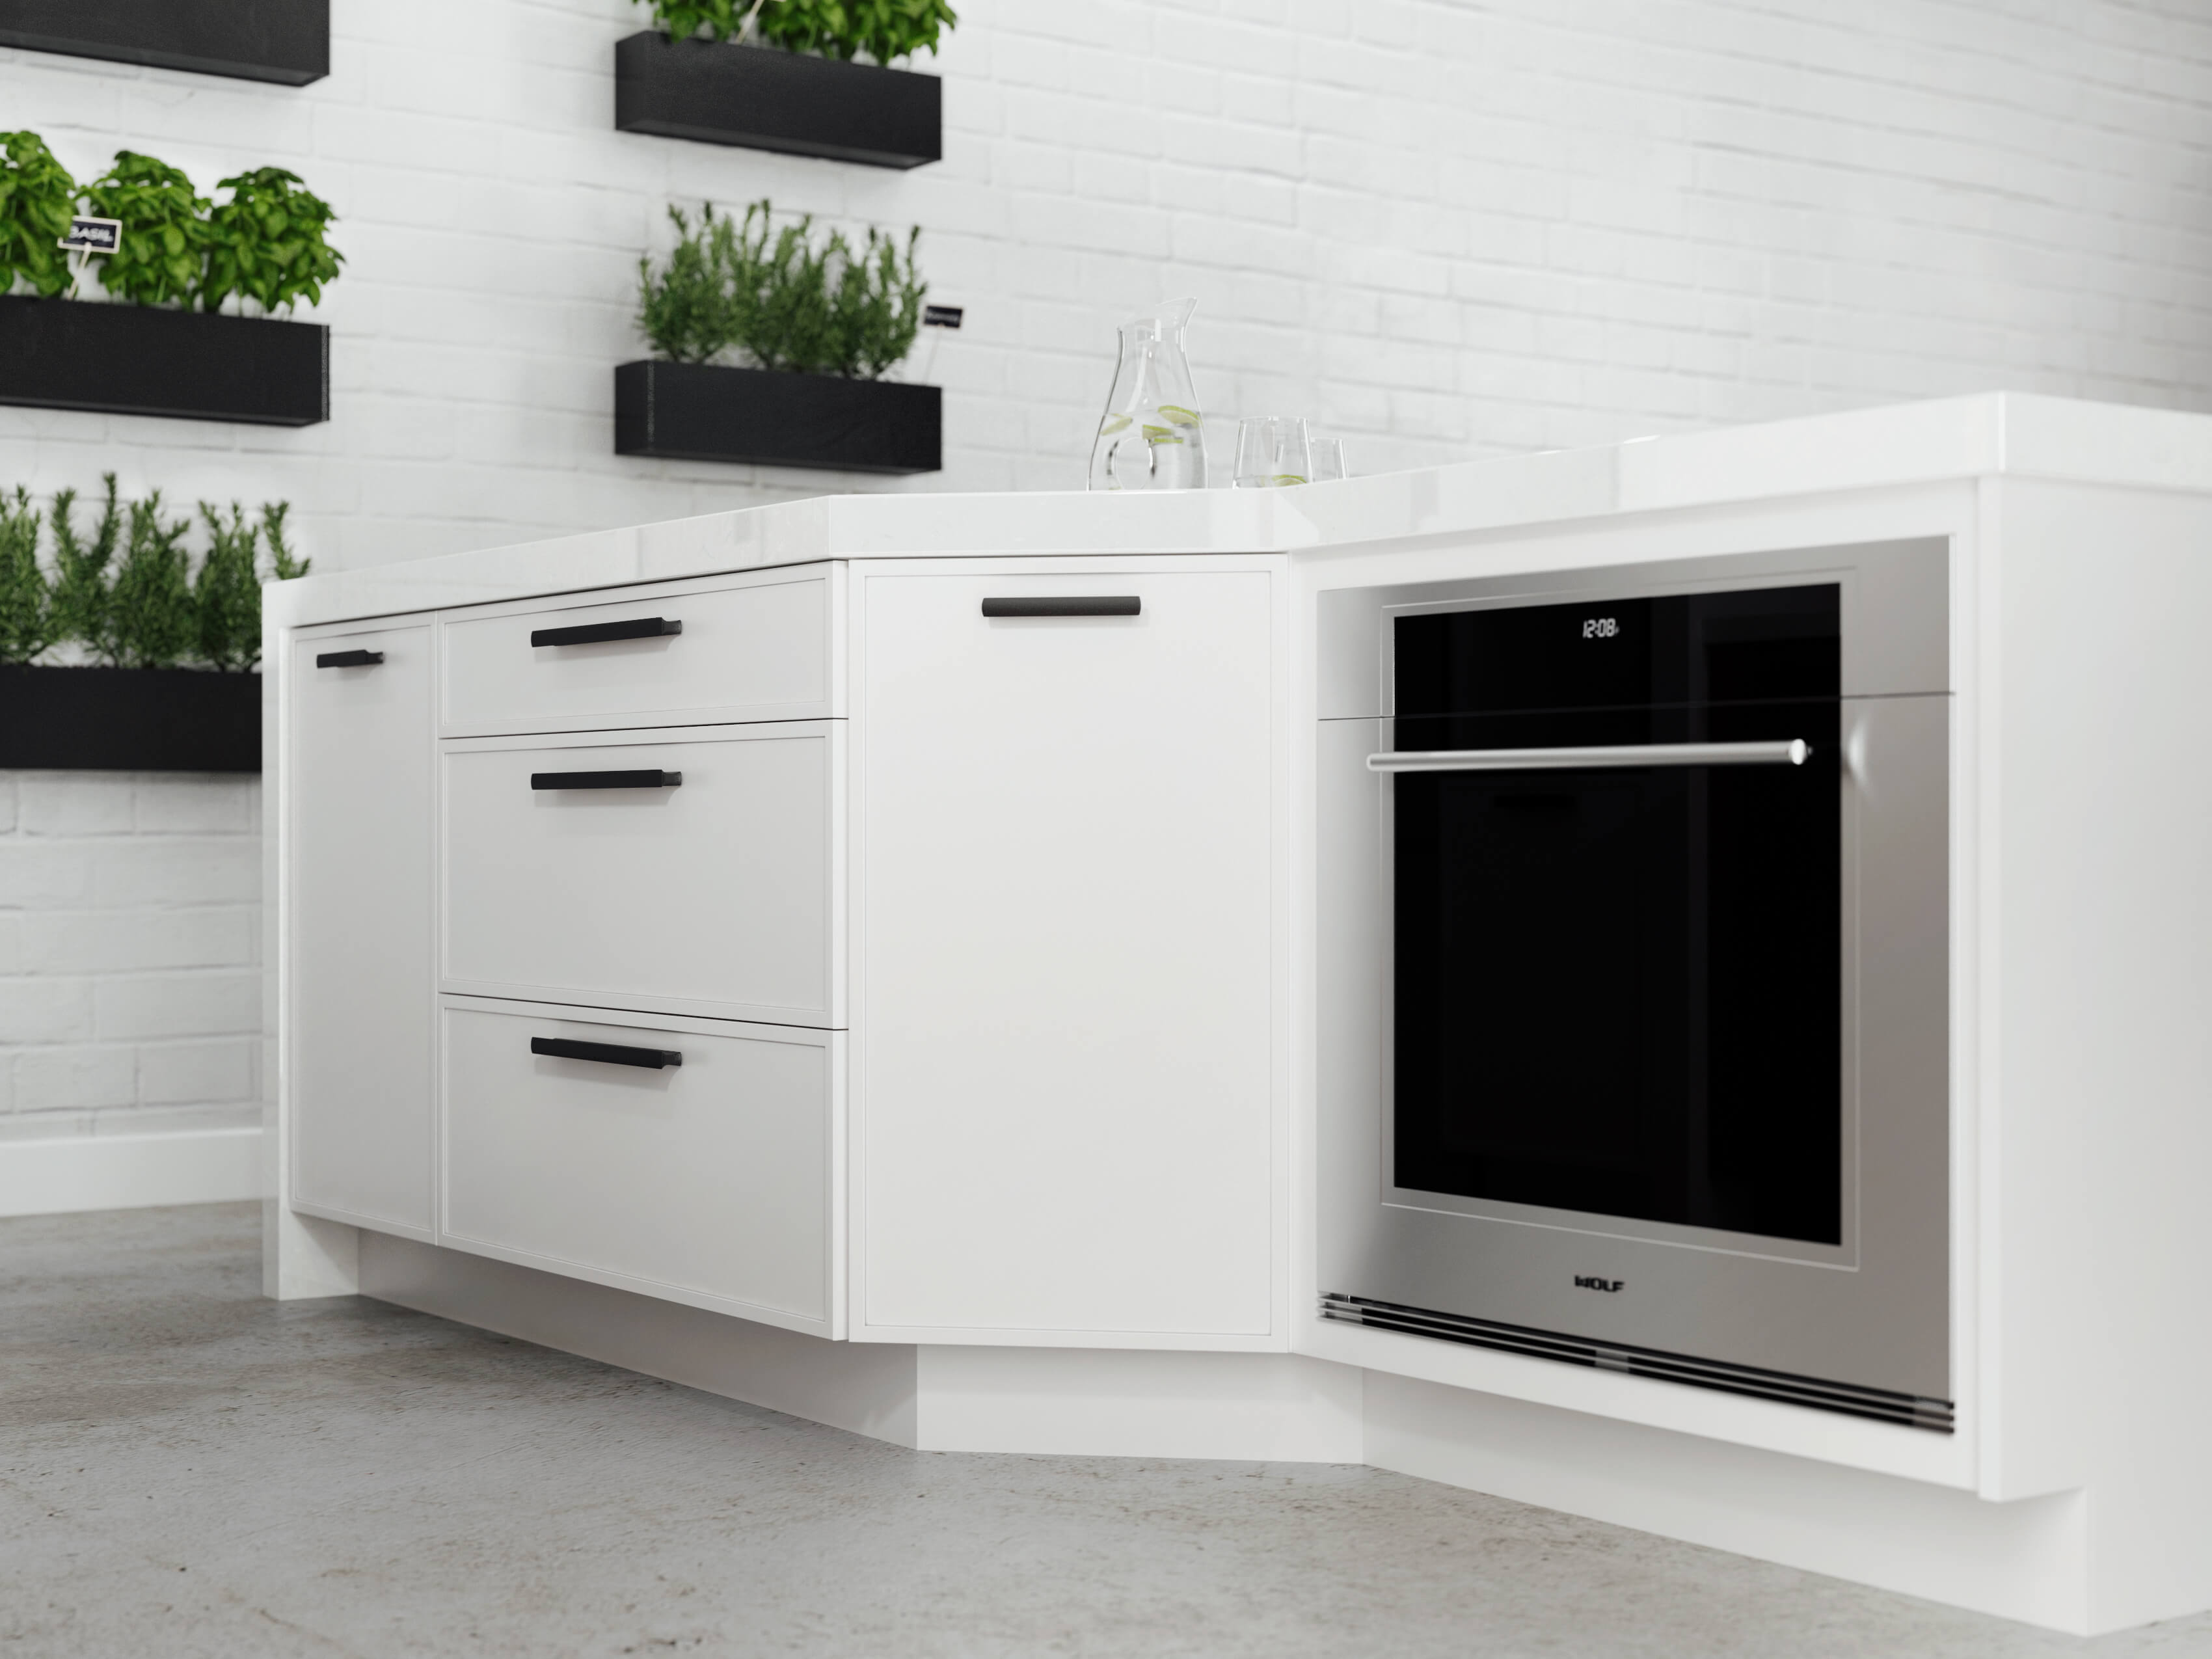 An angled white painted kitchen island in a modern kitchen with a skinny shaker door style.